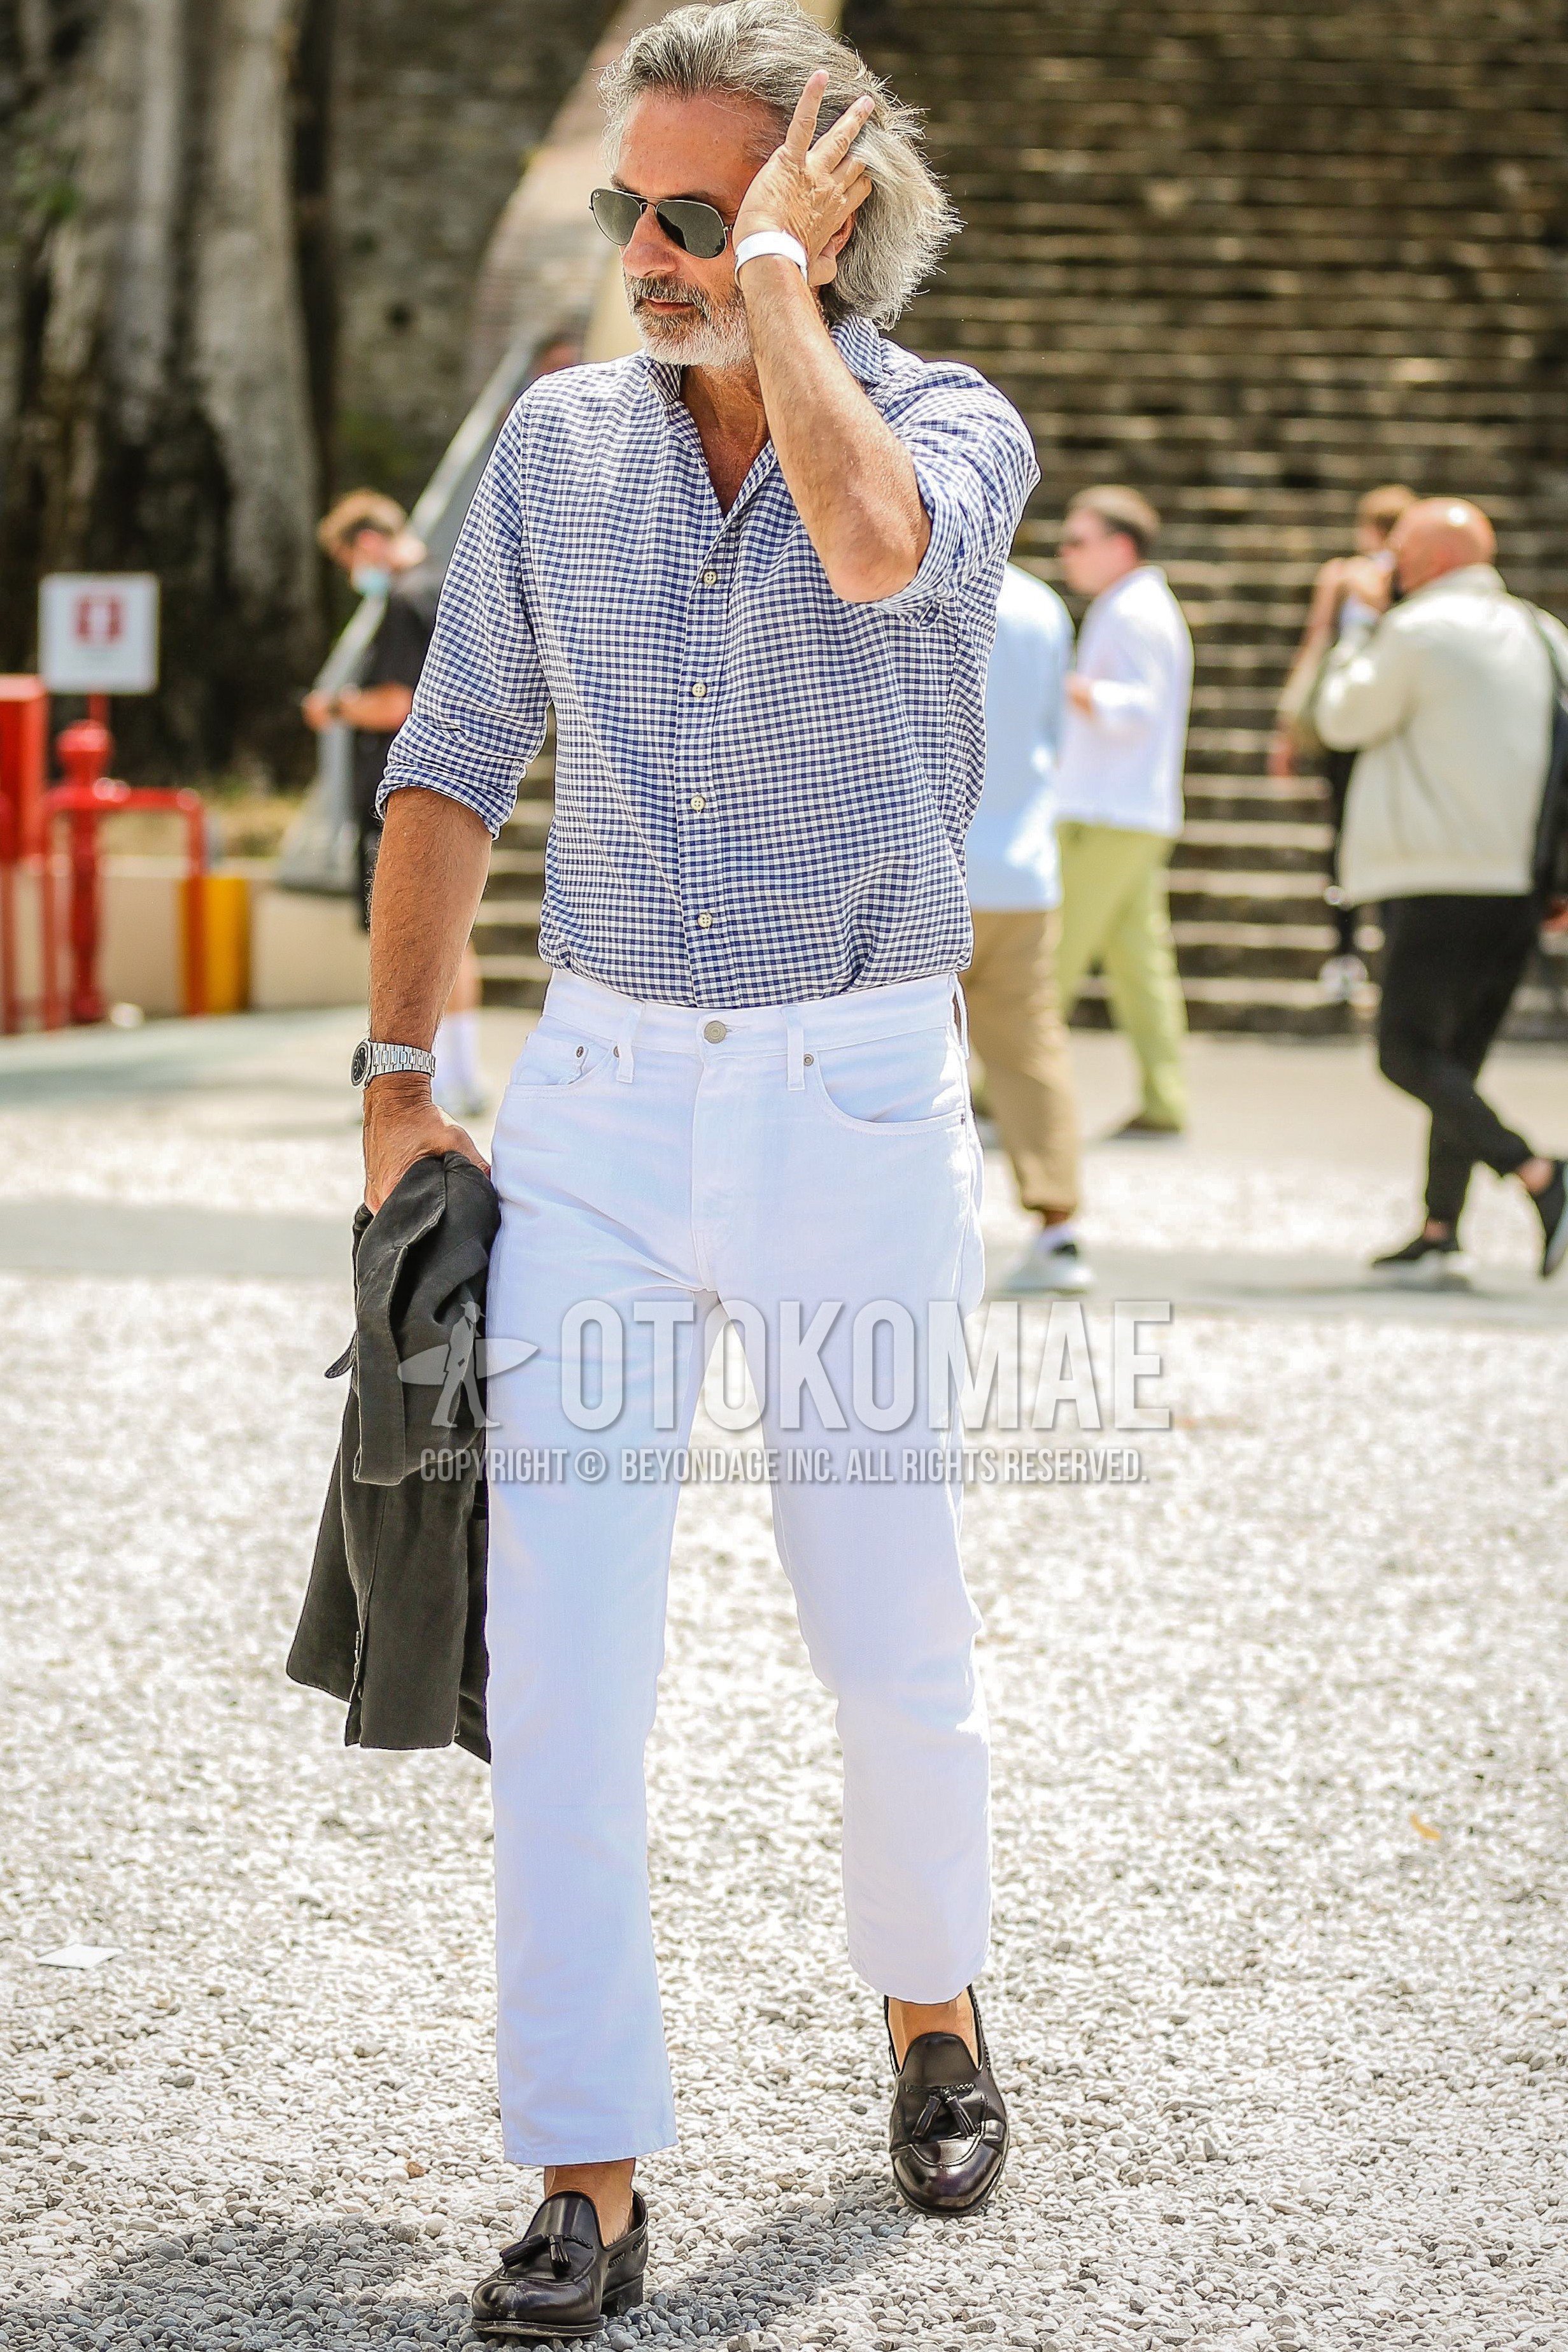 Men's spring summer outfit with silver plain sunglasses, light blue check shirt, white plain denim/jeans, black tassel loafers leather shoes.